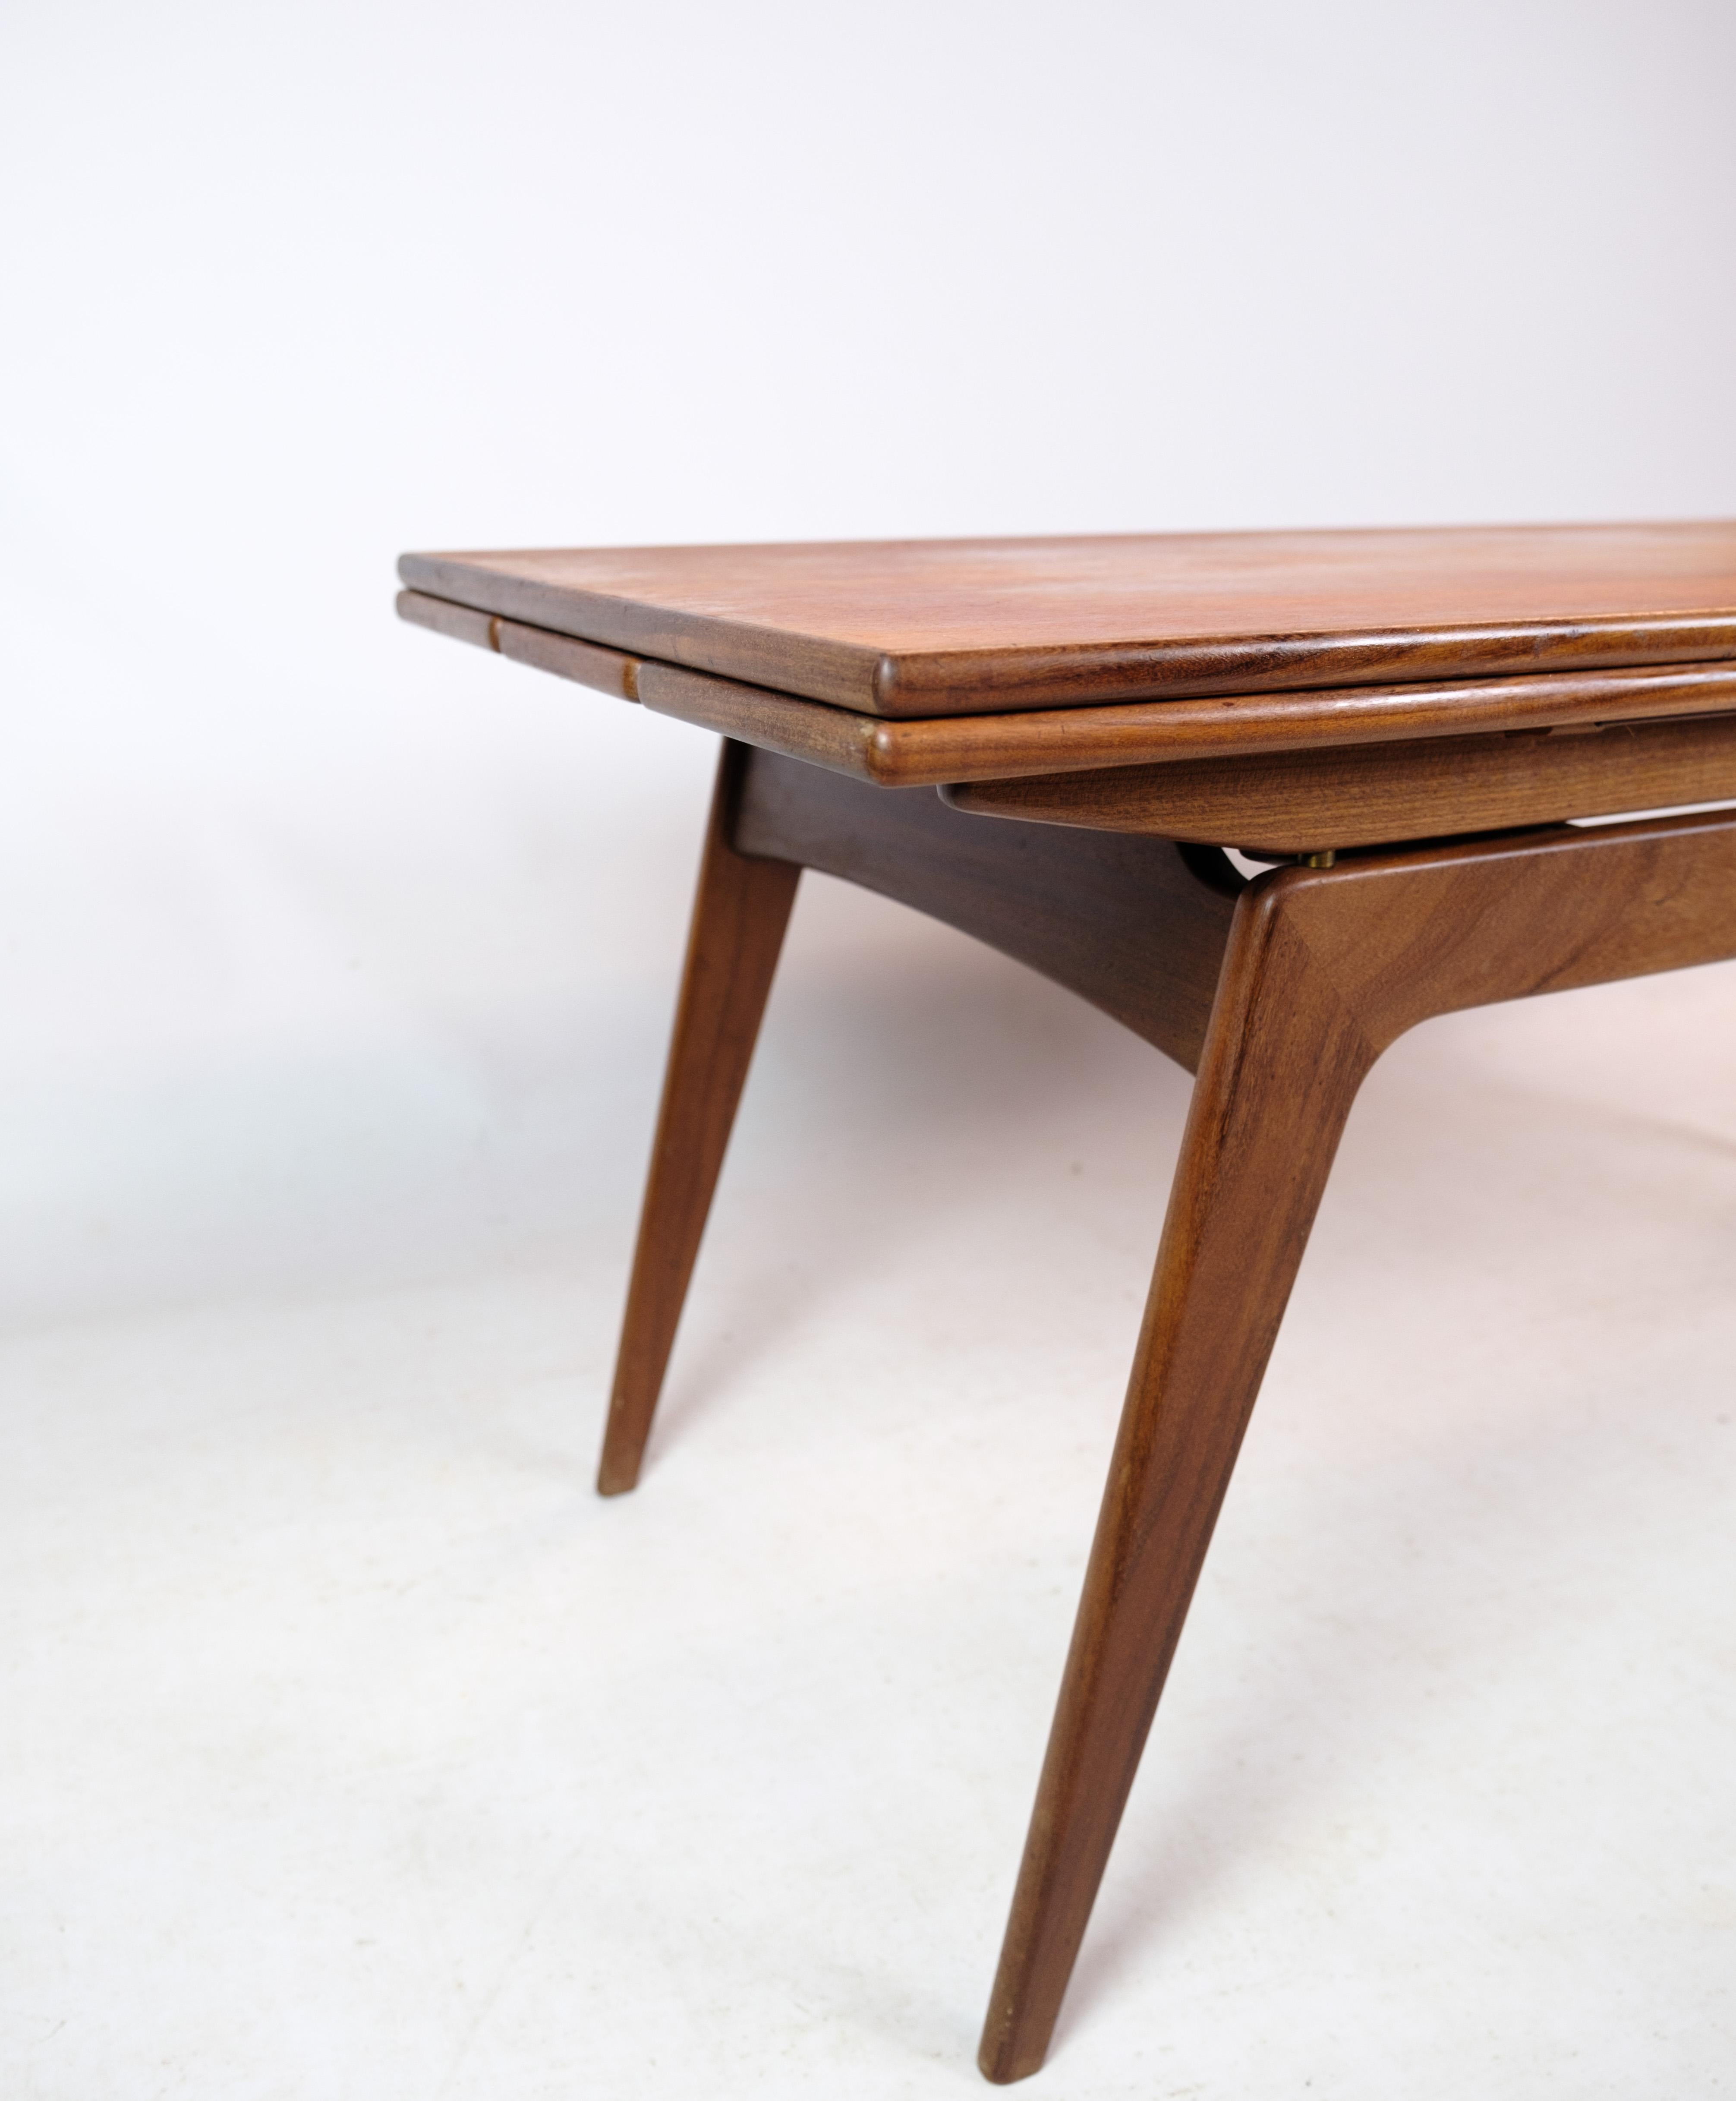 Coffee Table / Dining Table, Teak Wood, Copenhagen Table, Danish Furniture Manuf In Good Condition For Sale In Lejre, DK